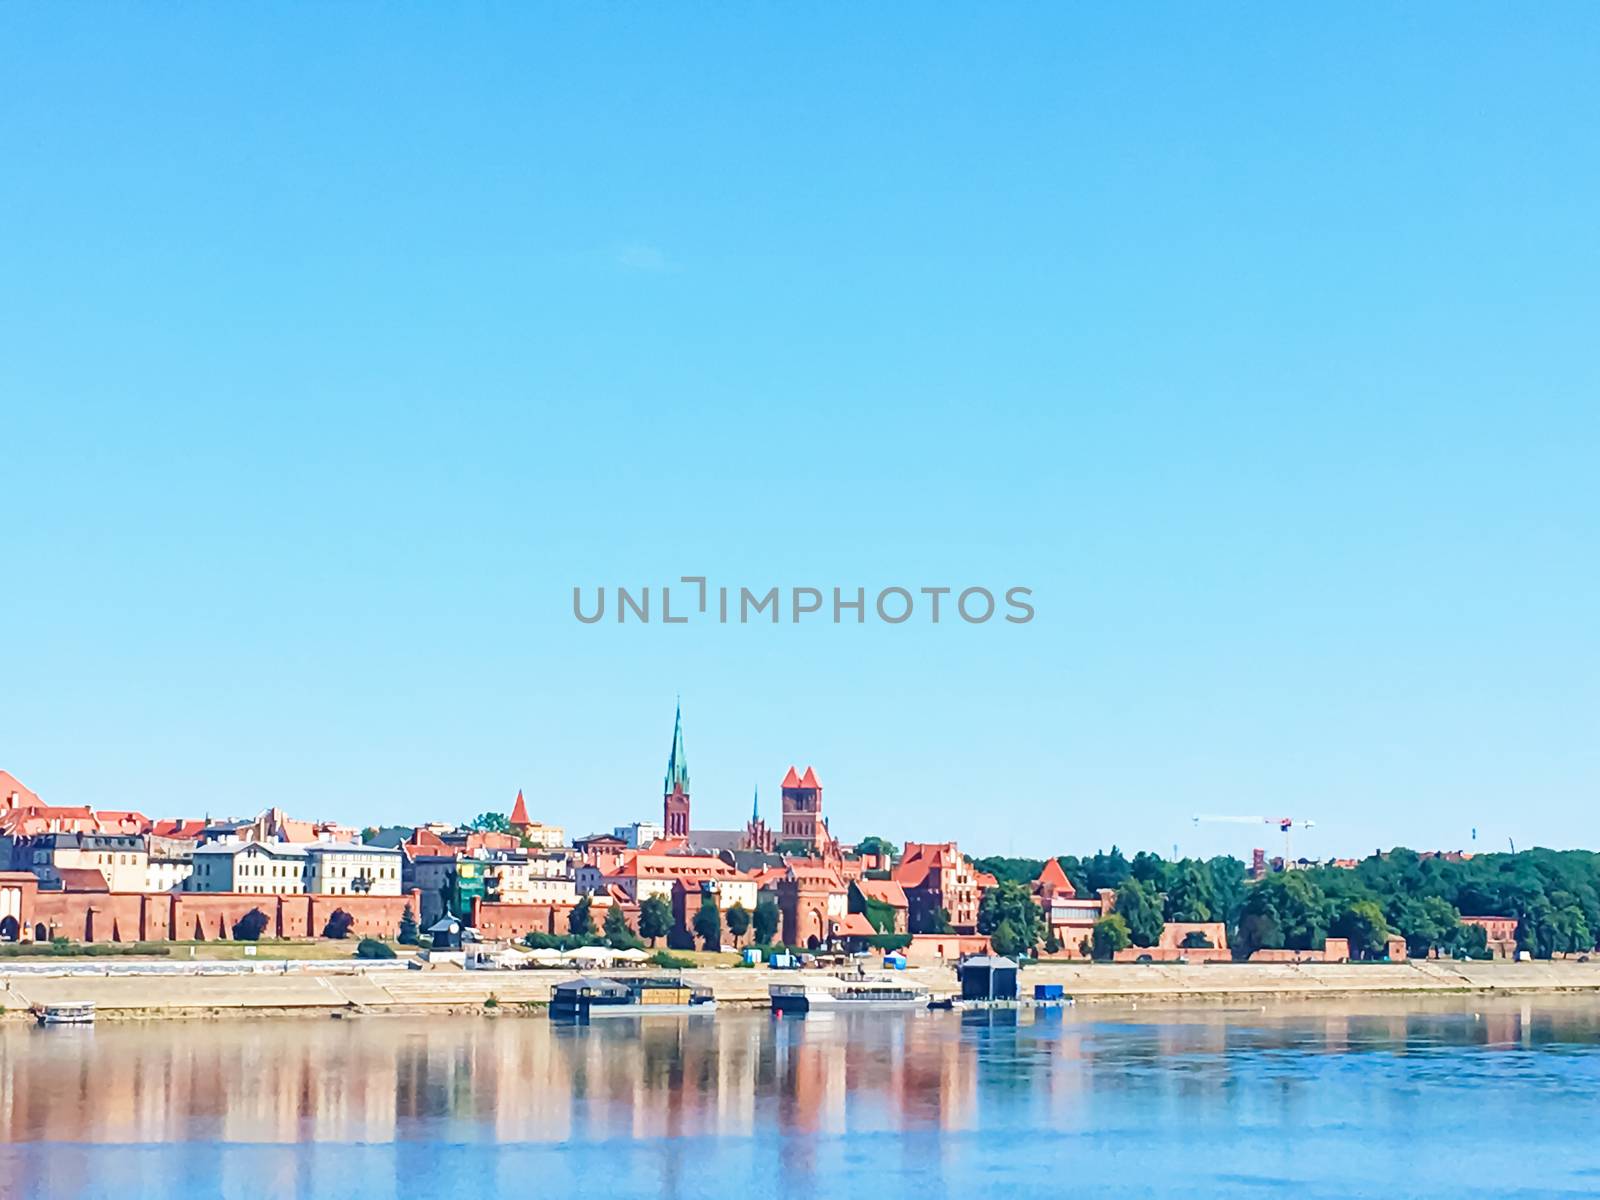 Cityscape view of Old Town in Torun, Poland by Anneleven